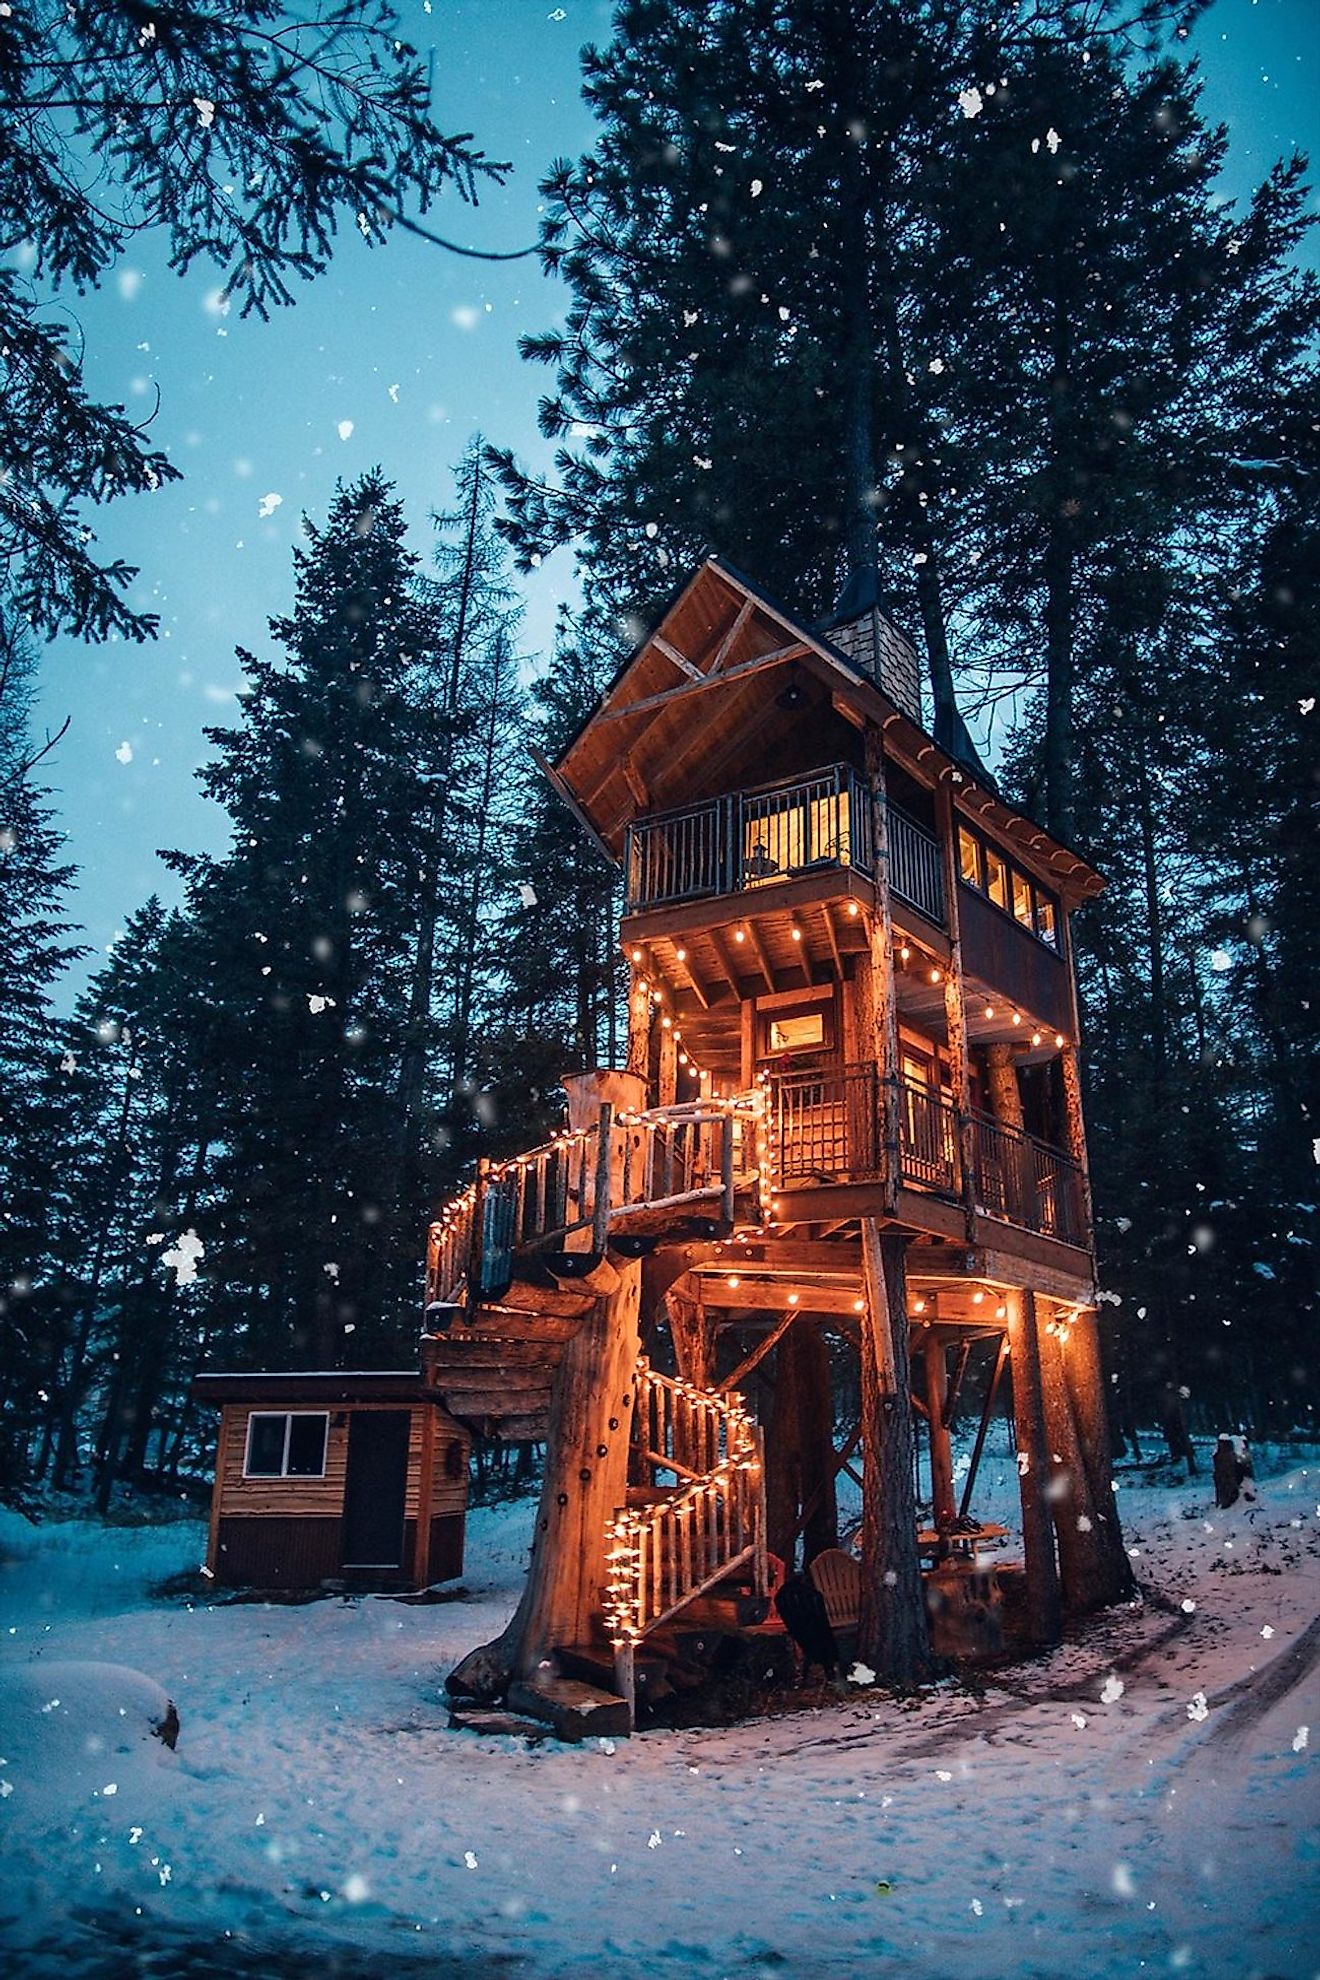 Montana Treehouse Retreat, the United States. Image credit: http://www.montanatreehouseretreat.com